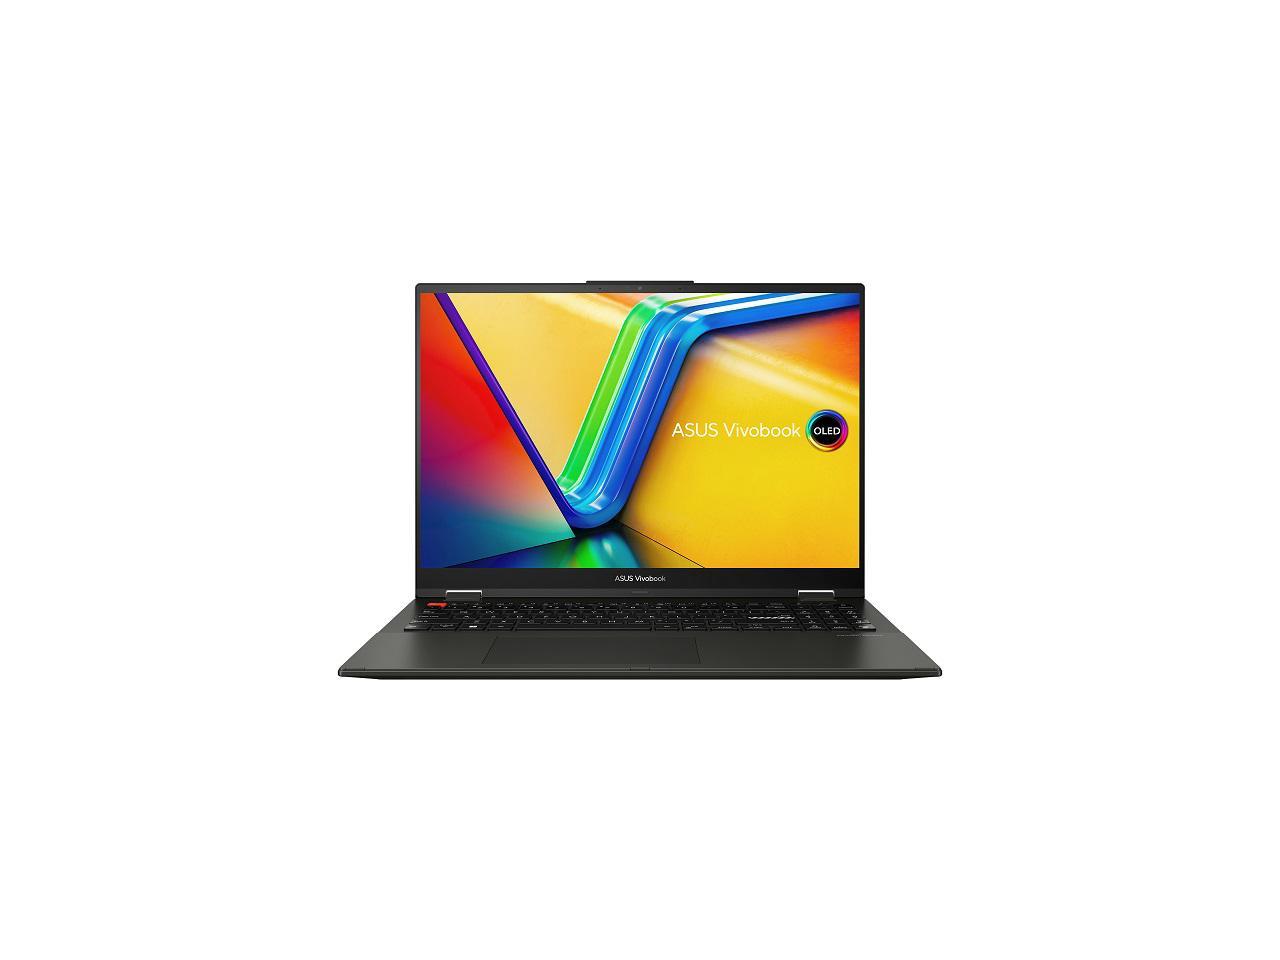 ASUS Notebooks VivoBook S 16 Flip Intel Core i9 13th Gen Up to 5.4GHz 16GB DDR4 Memory 1 TB PCIe G3 SSD SSD 16.0" Touchscreen Windows 11 Home TP3604VA-EB94T